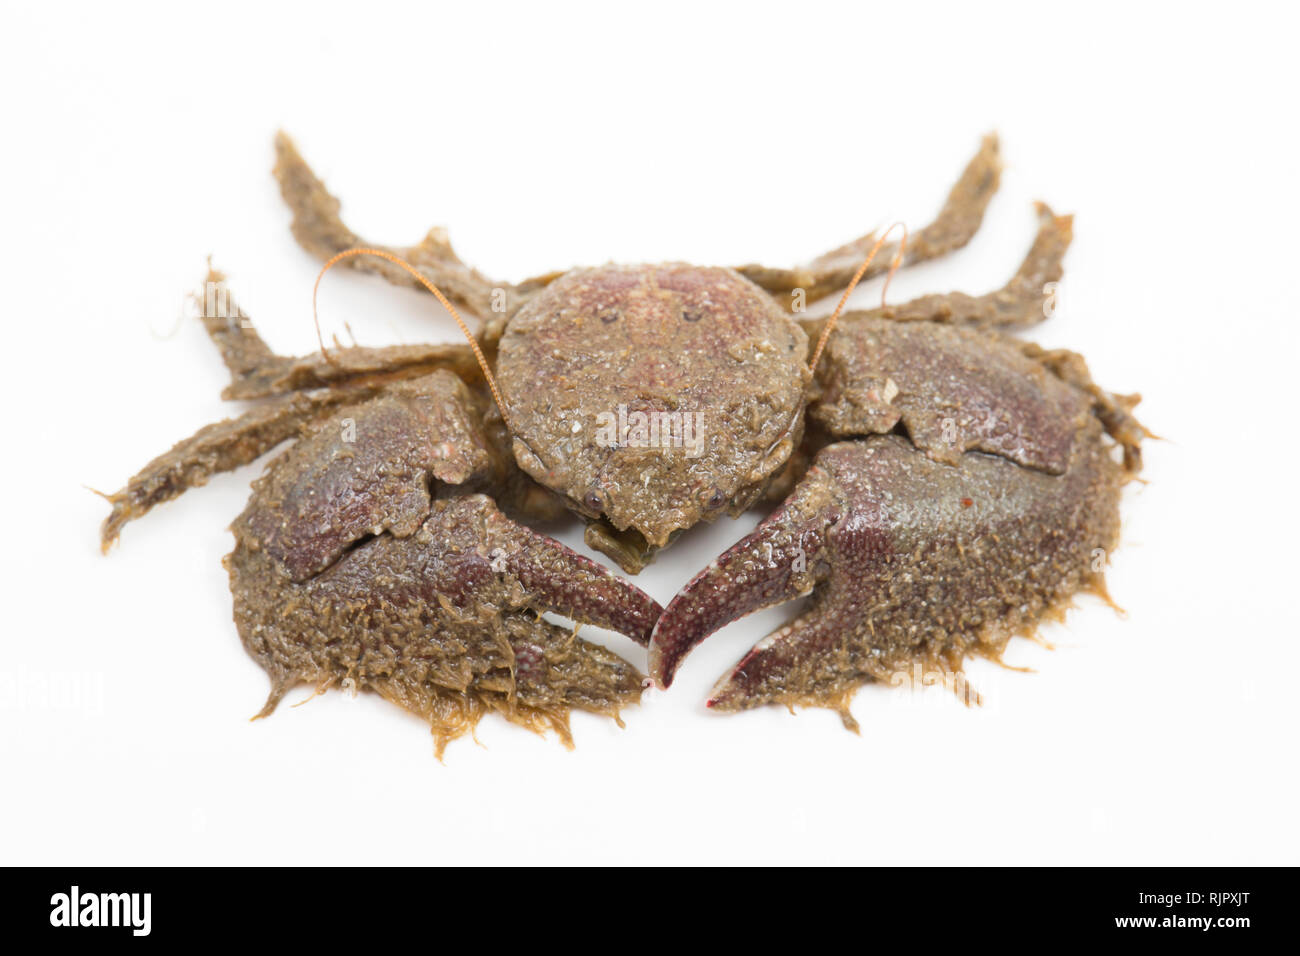 A Broad-clawed porcelain crab, Porcellana platycheles, photographed against a white background in a studio before release. The crabs are small with a  Stock Photo